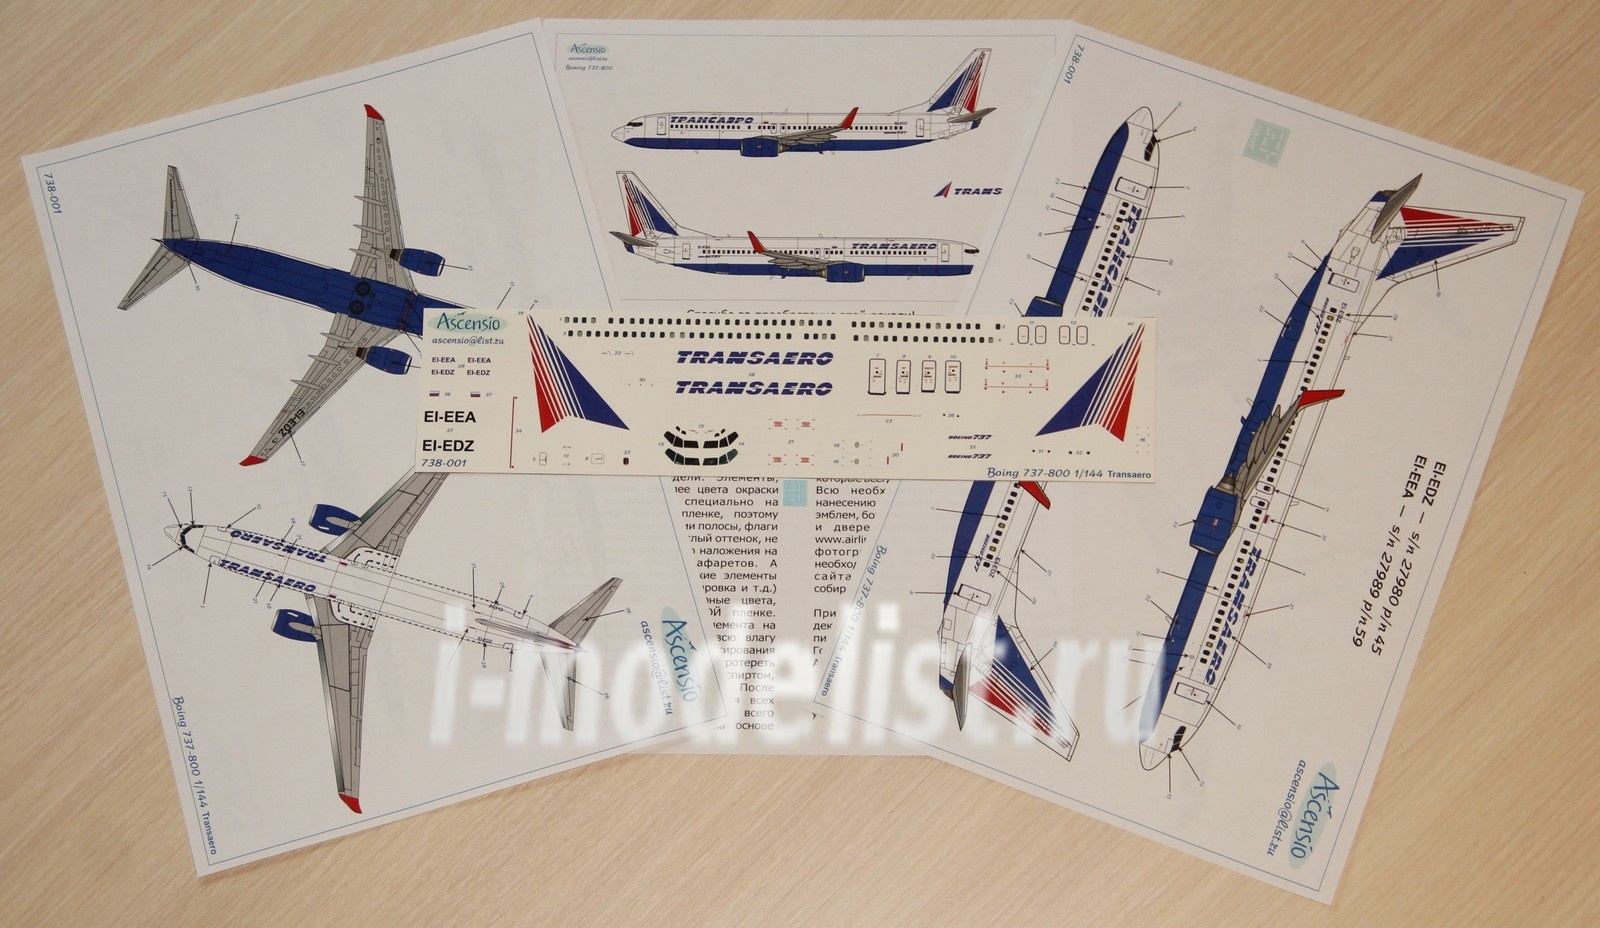 738-001 Ascensio 1/144 Scales the Decal on the plane Boeng 737-800s (transero)